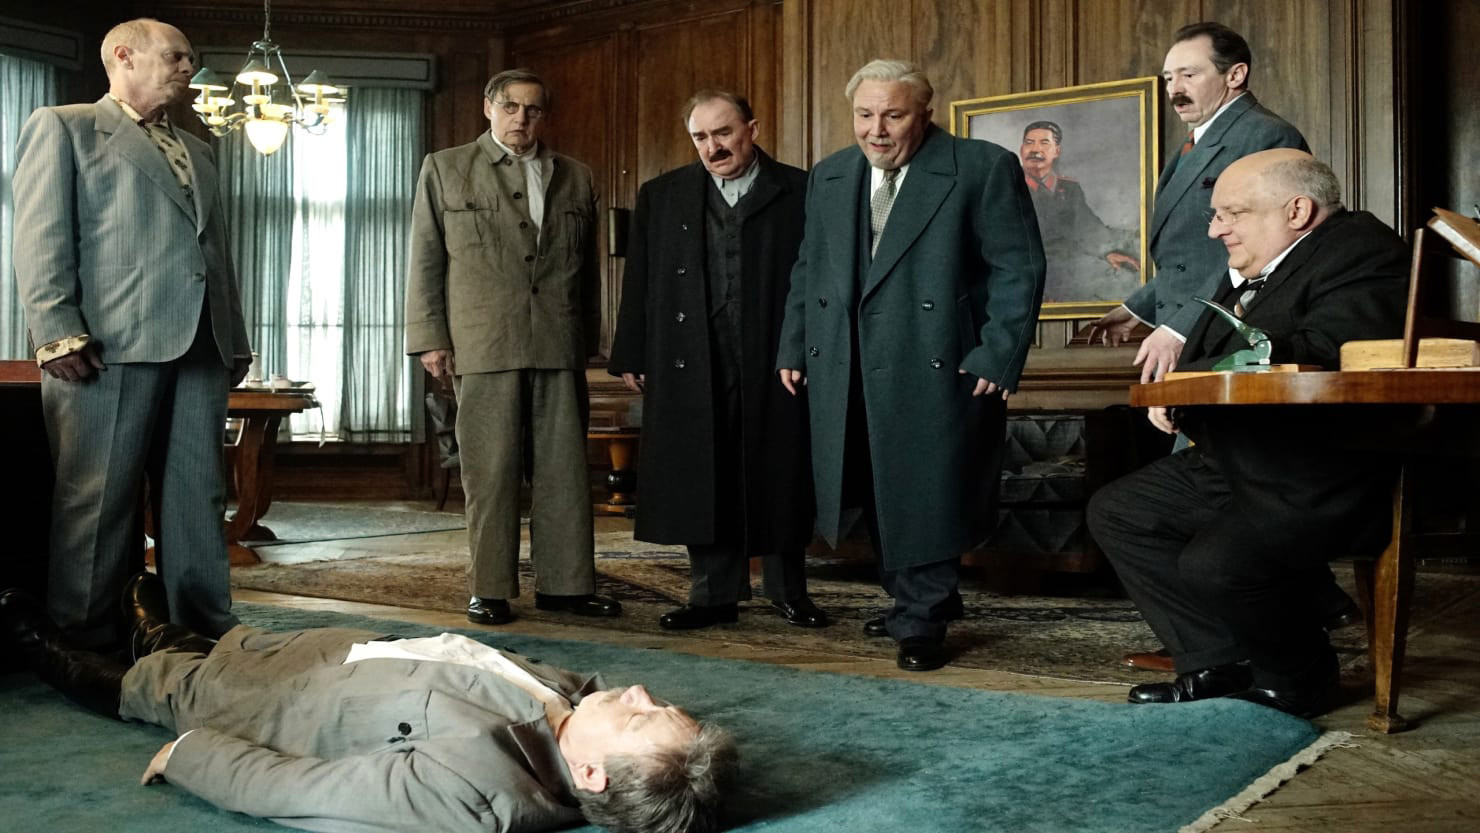 A still from the movie 'The Death of Stalin' (2017) by Armando Iannucci.